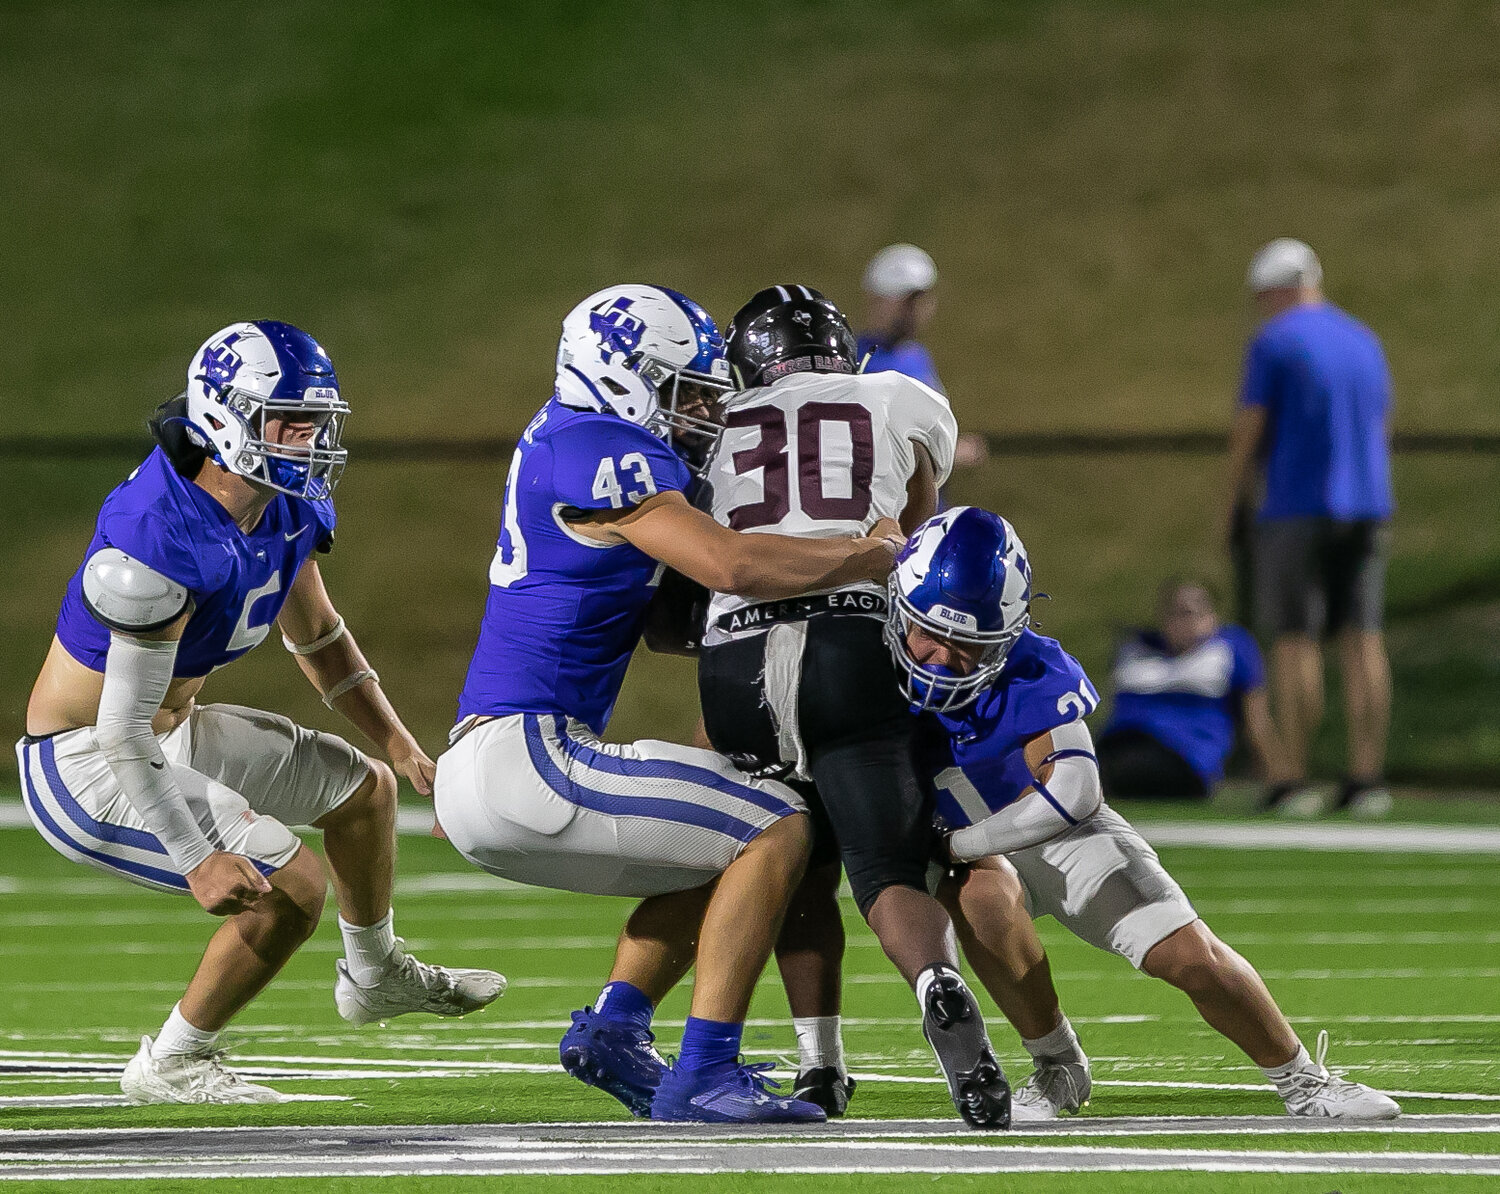 Patrick Miller and Connor Chupa make a tackle on George Ranch's Malachi Montgomery during Thursday's game between Taylor and George Ranch at Rhodes Stadium.